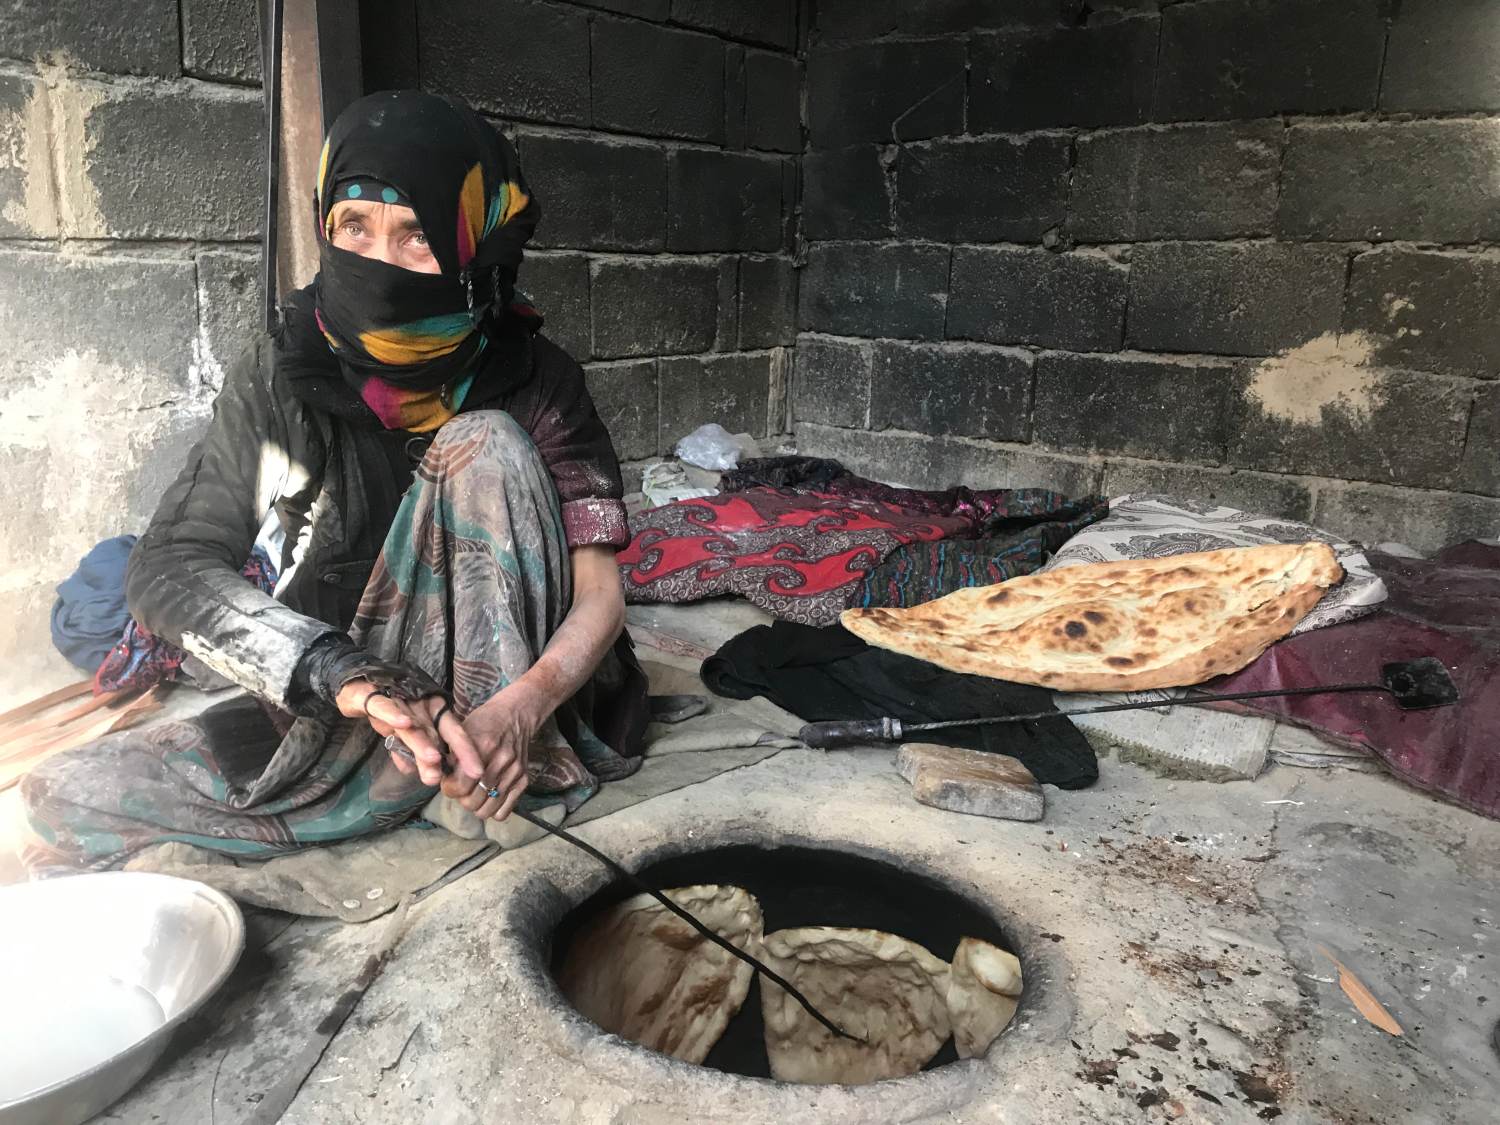 Tahera Mohamedi hunches over a tandoor oven where she bakes bread for a living in a refugee settlement near Barikab, on the outskirts of Kabul, Afghanistan. November 7, 2019. Thomson Reuters Foundation/Rina Chandran